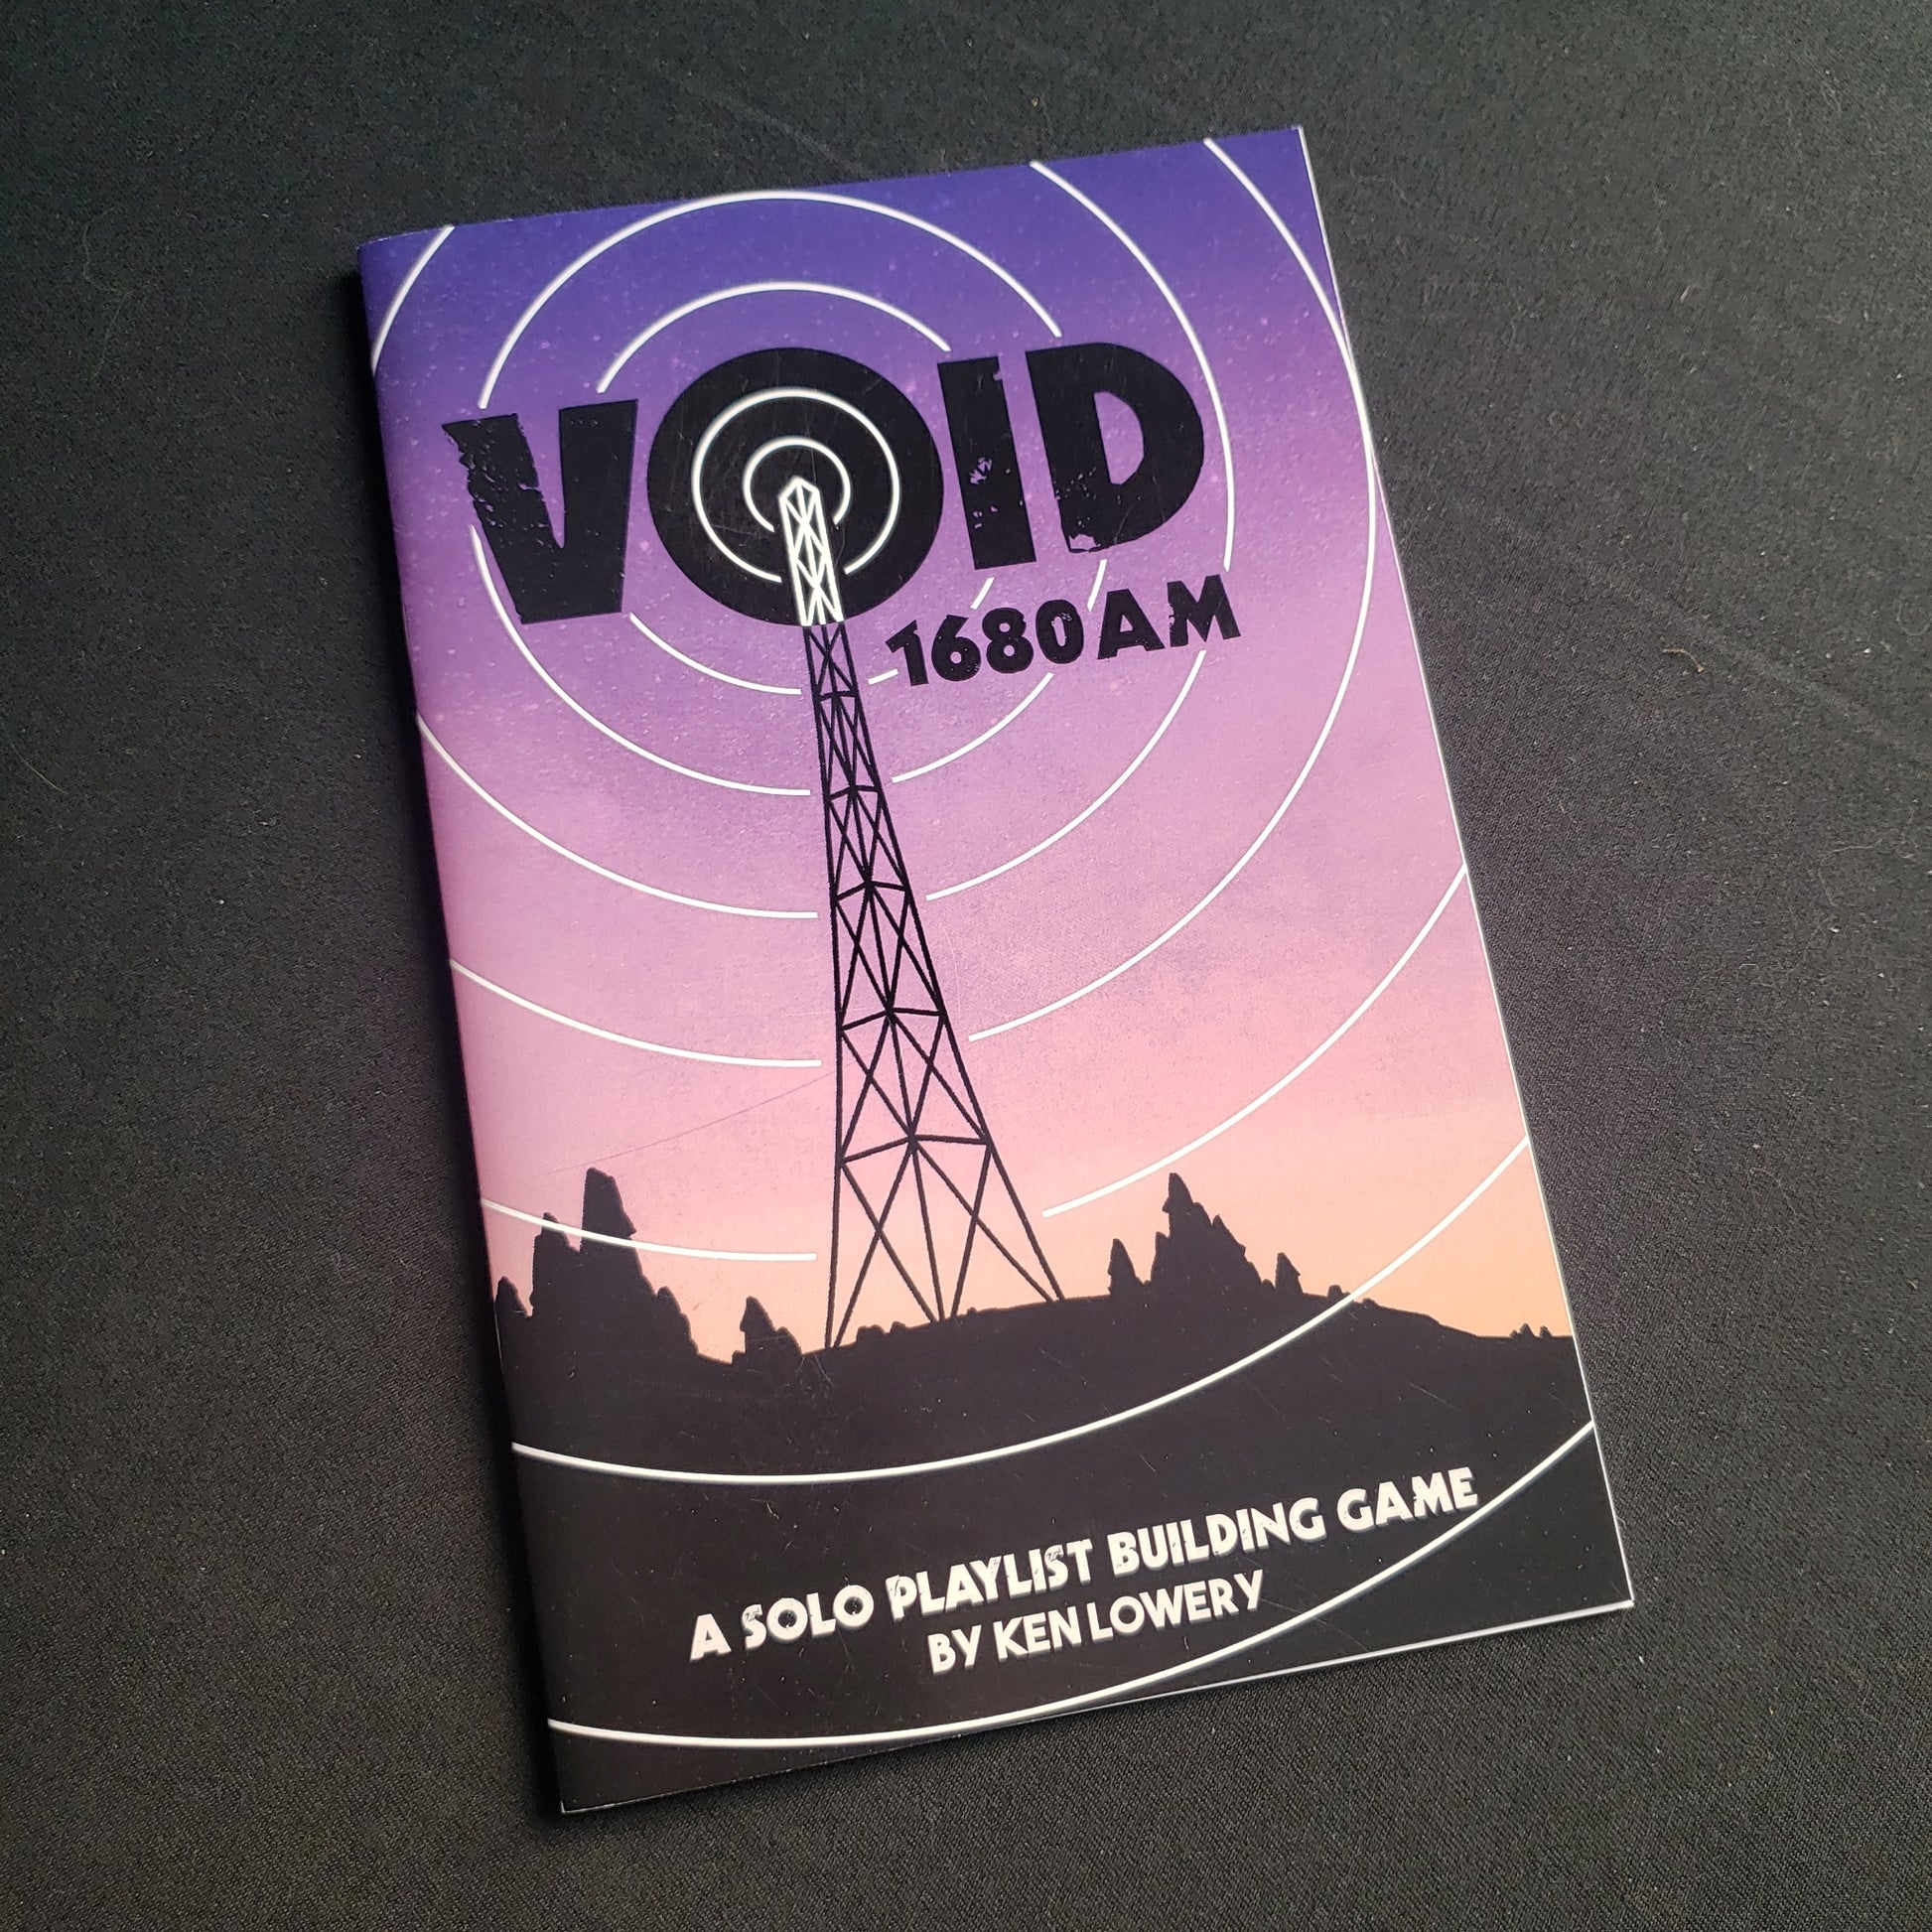 Image shows the front cover of the VOID 1680 AM roleplaying game book